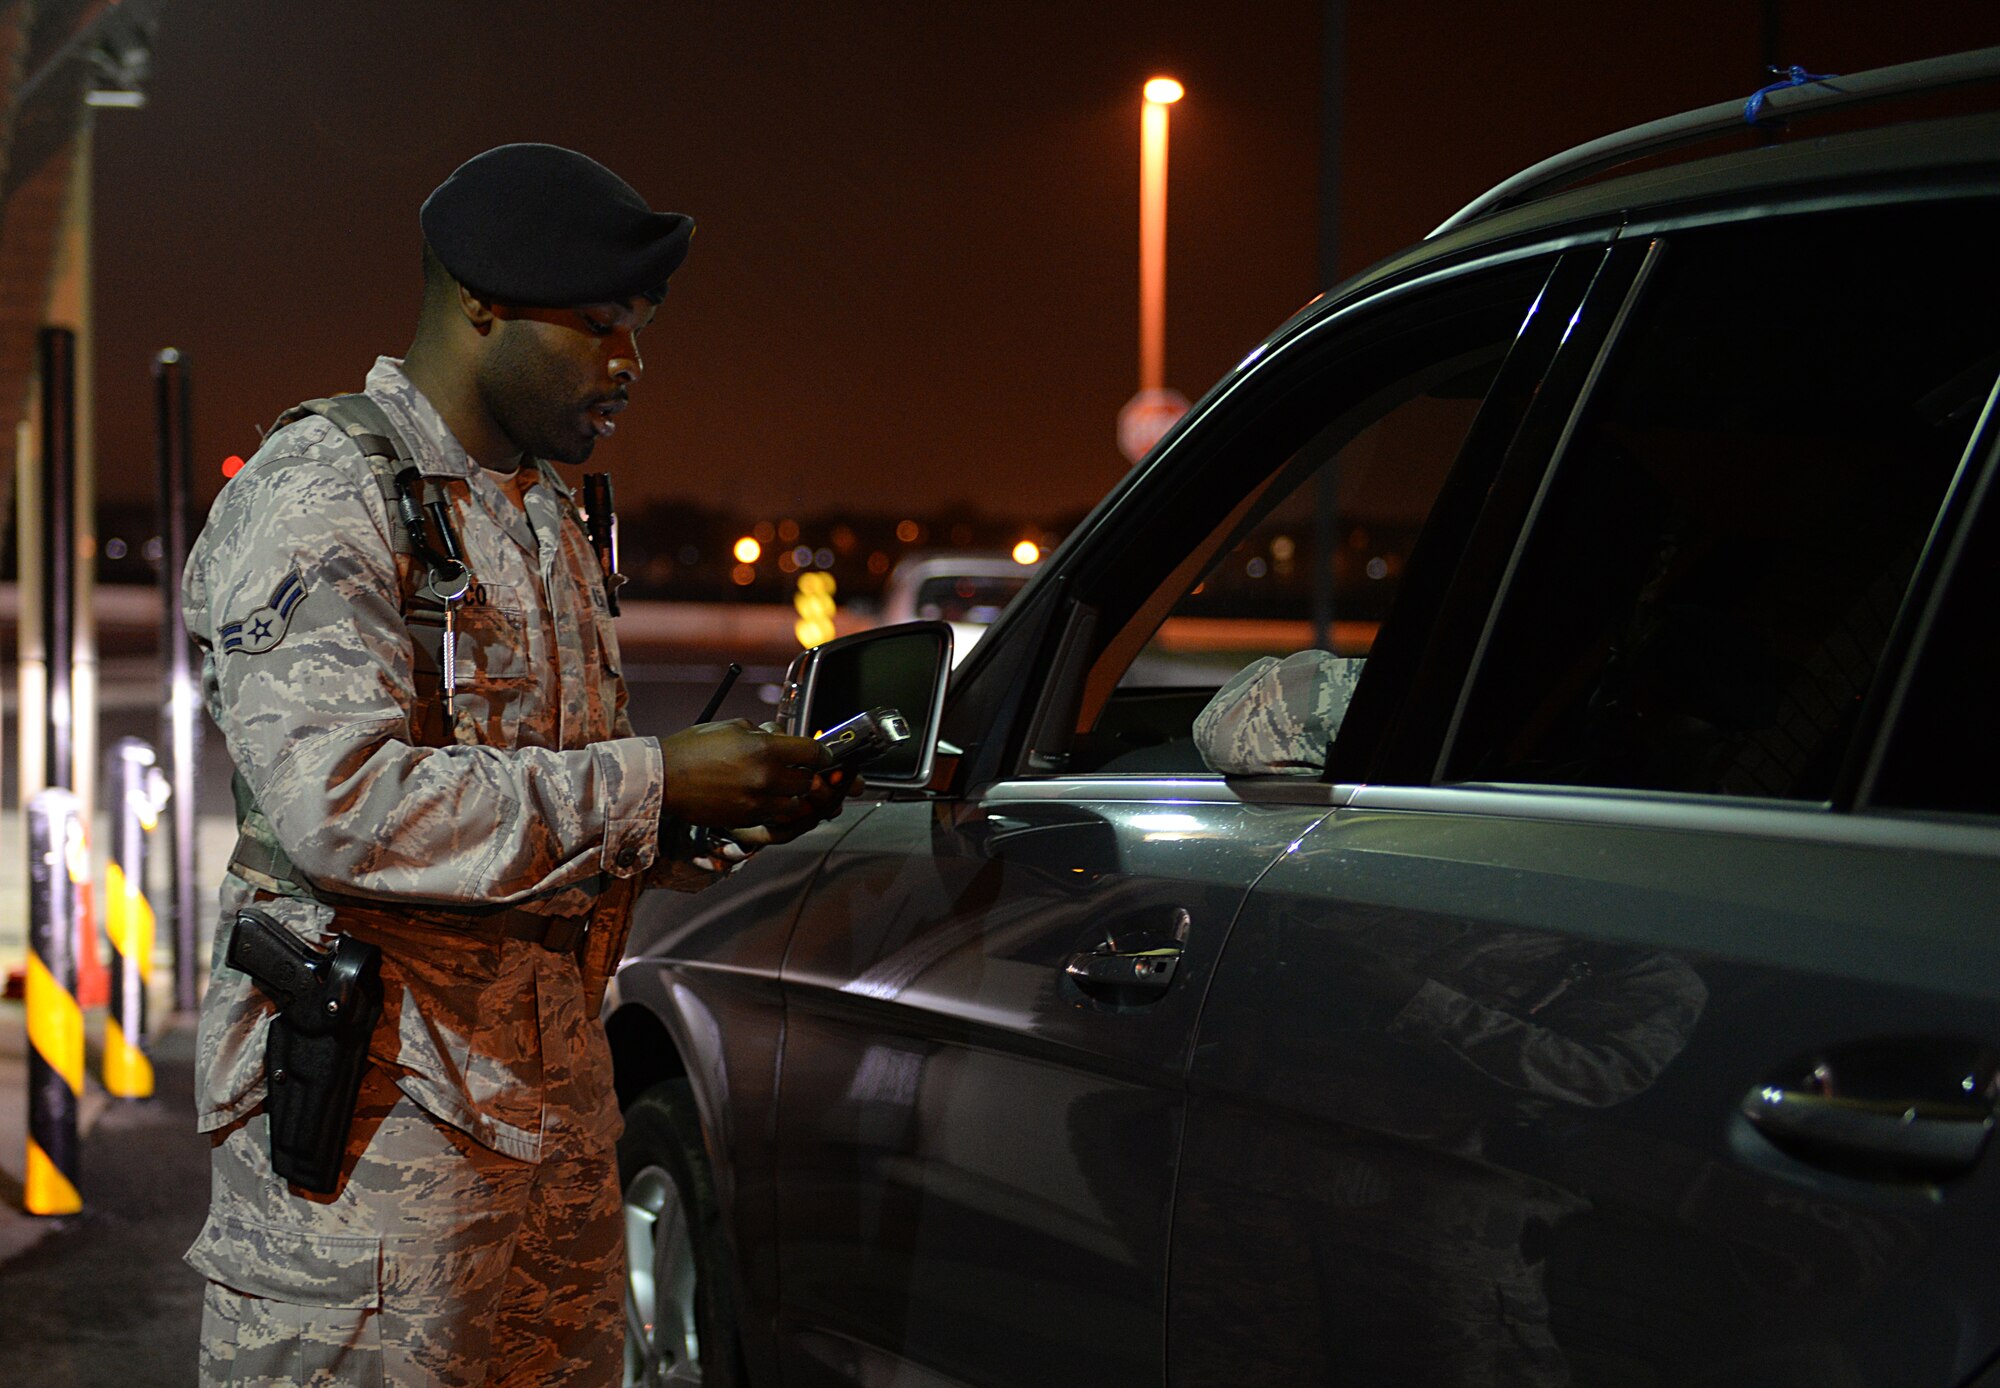 Airman 1st Class Darryl Glasco, 81st Security Forces entry controller, checks I.D. cards at a base entrance March 12, 2015, Keesler Air Force Base, Miss. 81st SFS Airmen perform multiple roles to keep members of Keesler safe, ranging from identification checks at base entrances to searching for explosives and narcotics with military working dogs. (U.S. Air Force photo by Senior Airman Holly Mansfield)